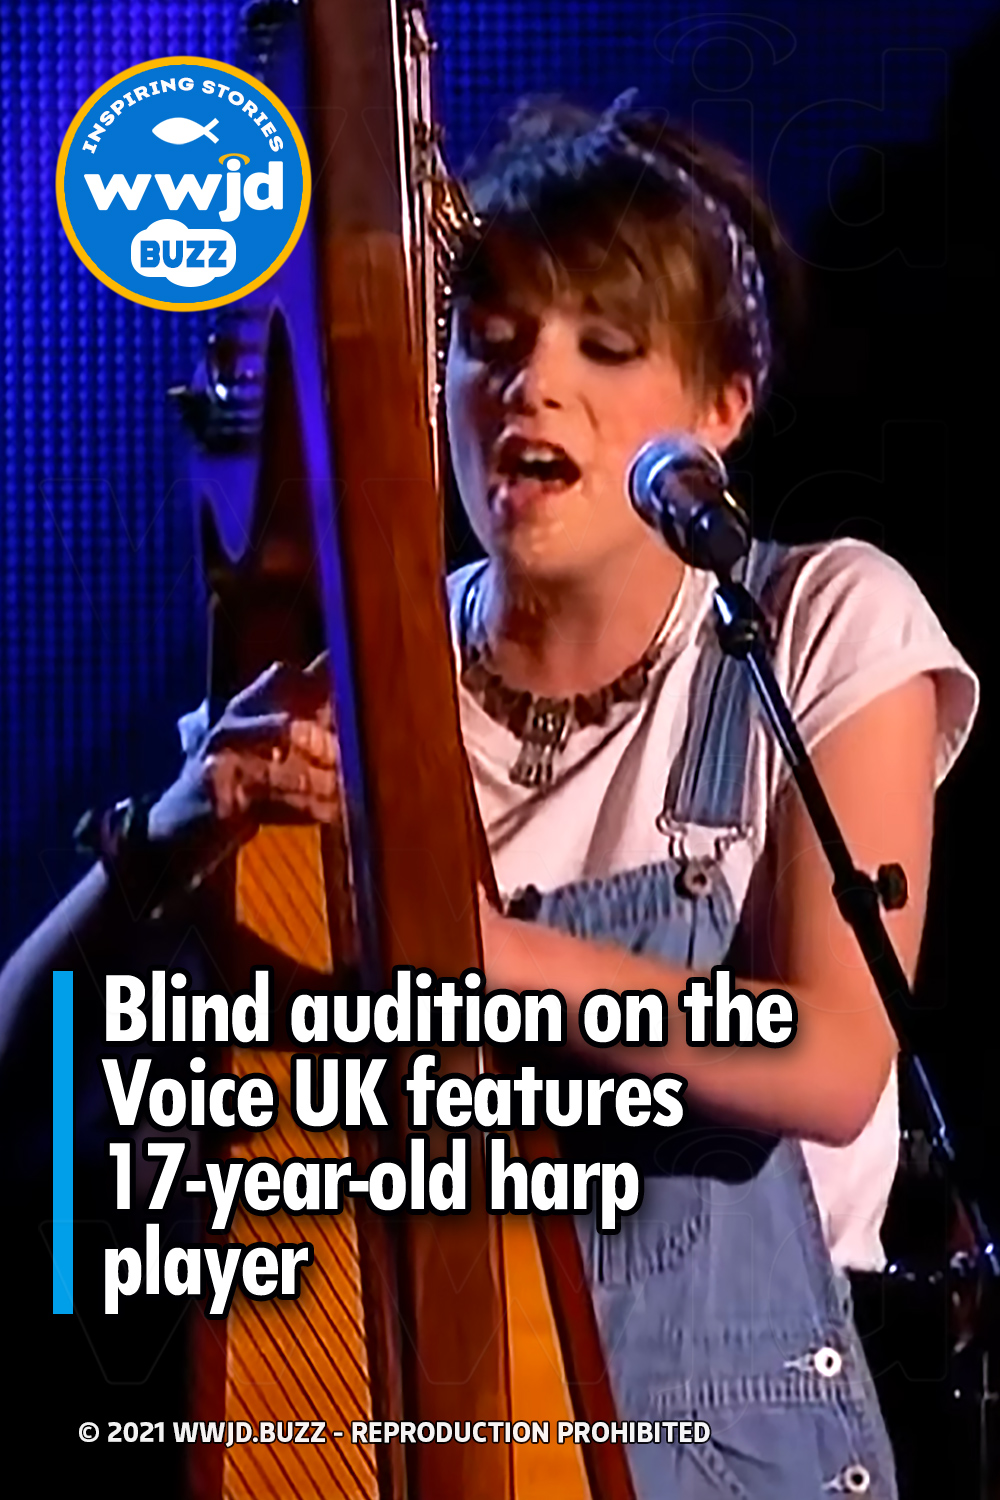 Blind audition on the Voice UK features 17-year-old harp player